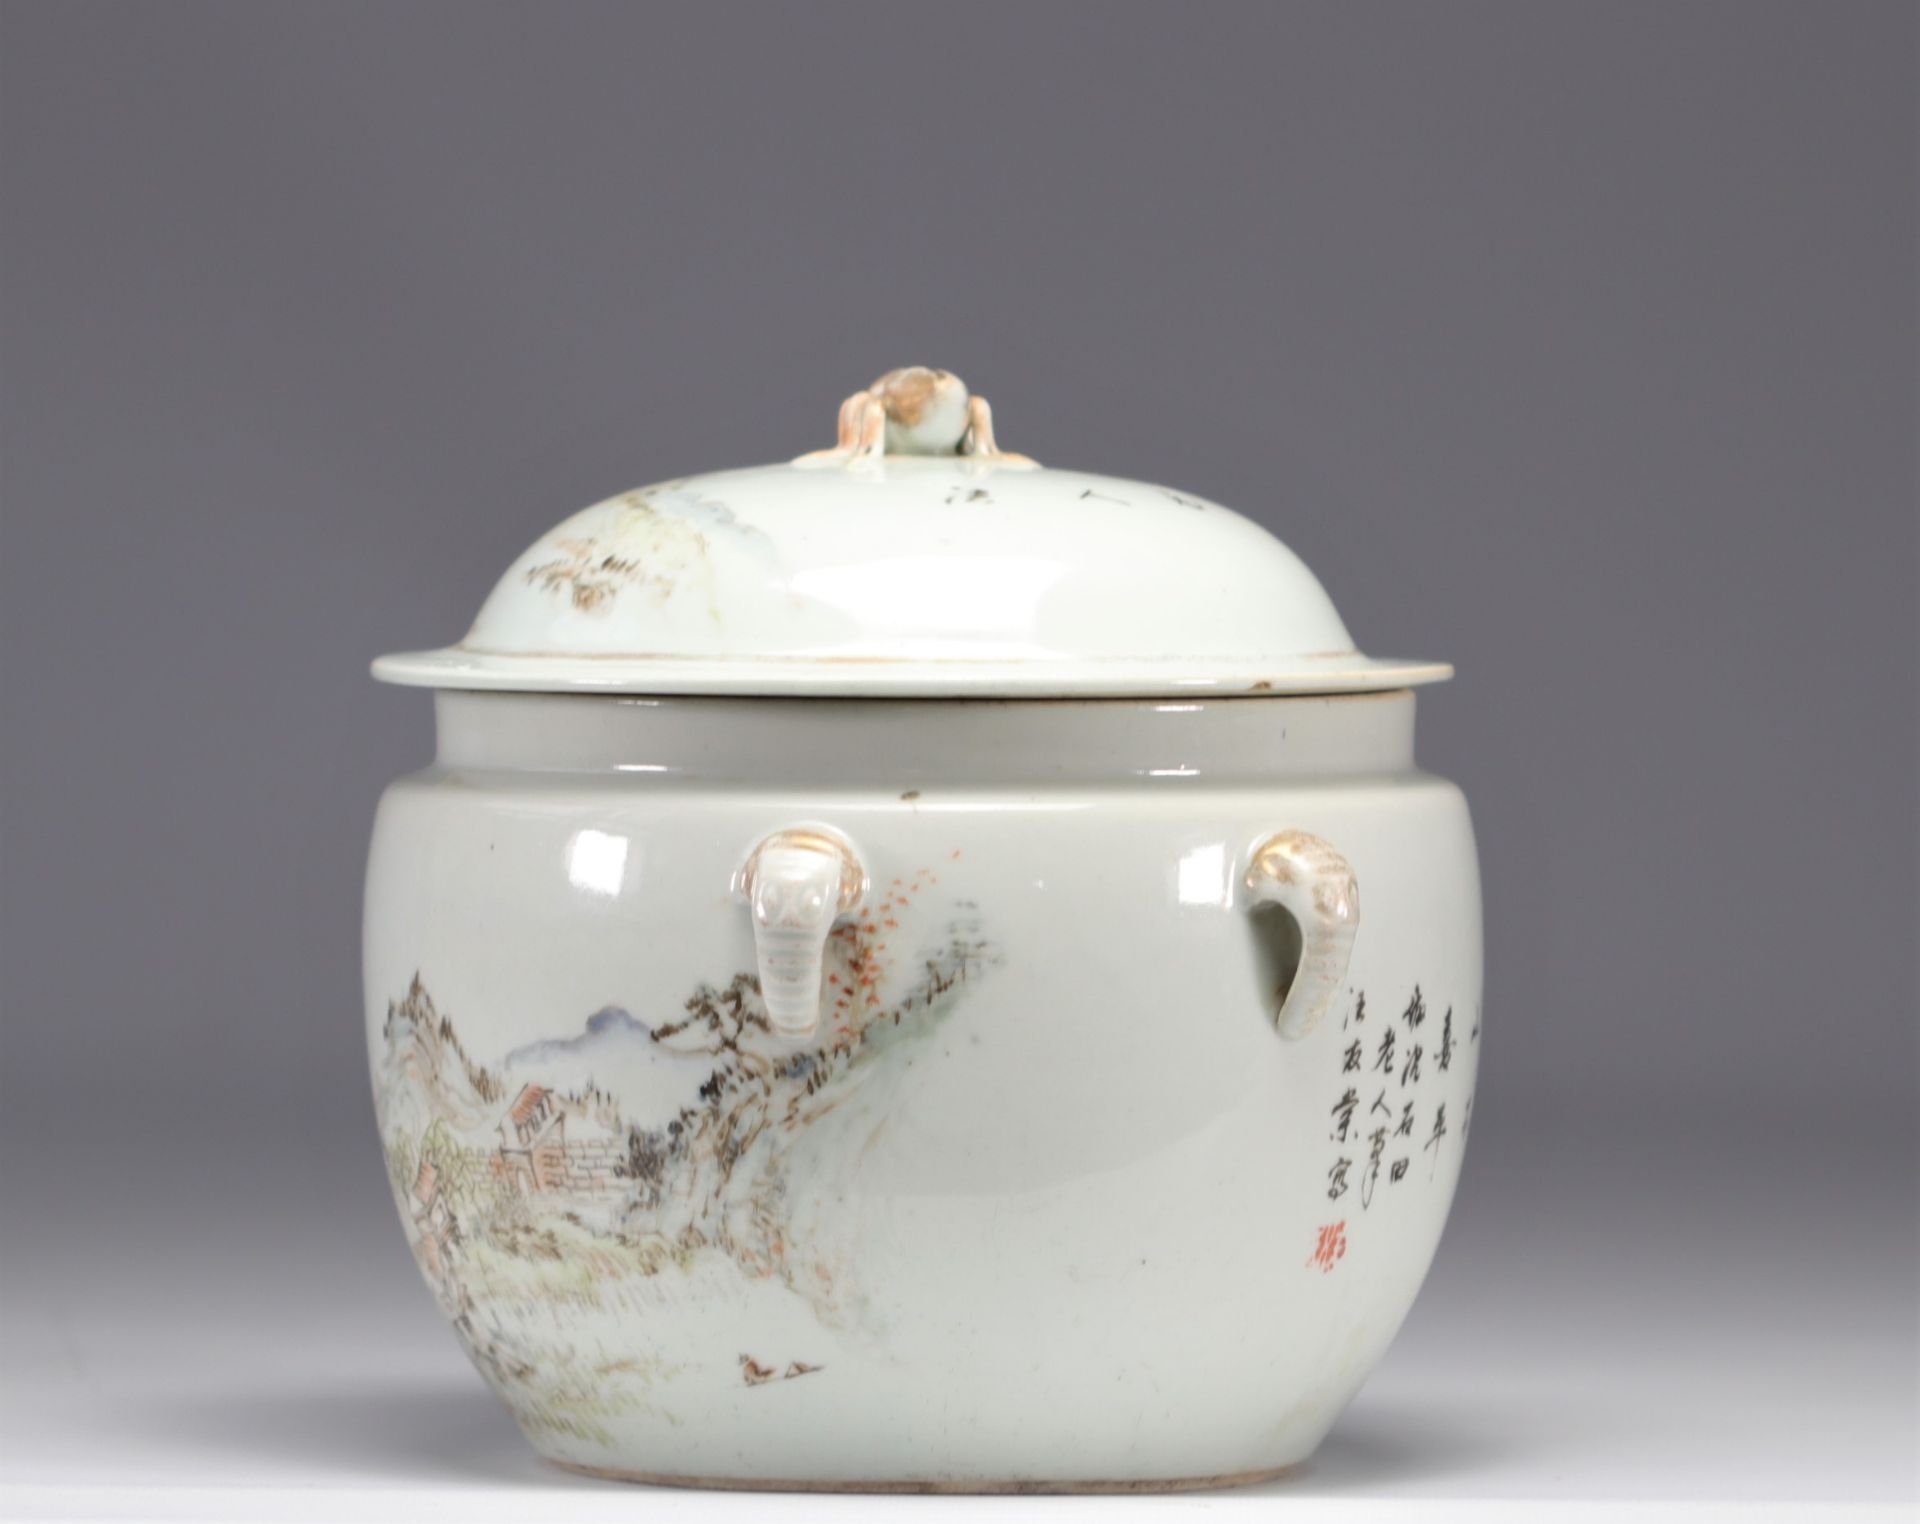 Covered Chinese porcelain tureen decorated with mountain landscapes - Image 3 of 4